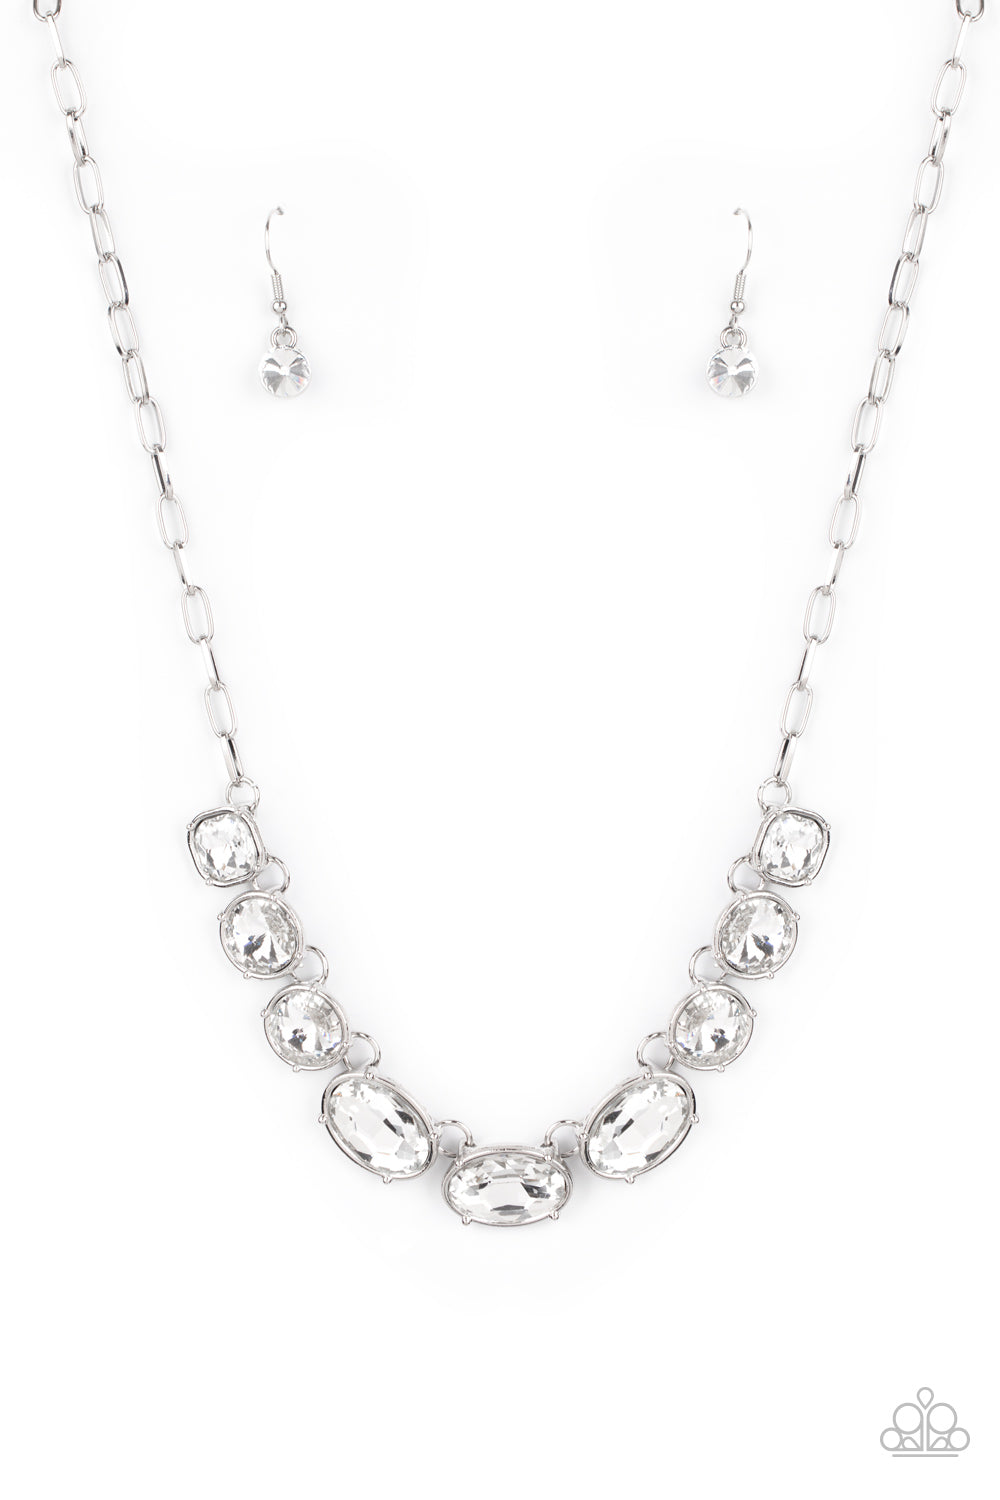 Gorgeously Glacial - White and Silver Necklace - Paparazzi Accessories - 
Featuring mismatched round, oval, and square cuts, a glittery row of dramatically oversized white rhinestones delicately link below the collar for an icy finish. Features an adjustable clasp closure.
Sold as one individual necklace.